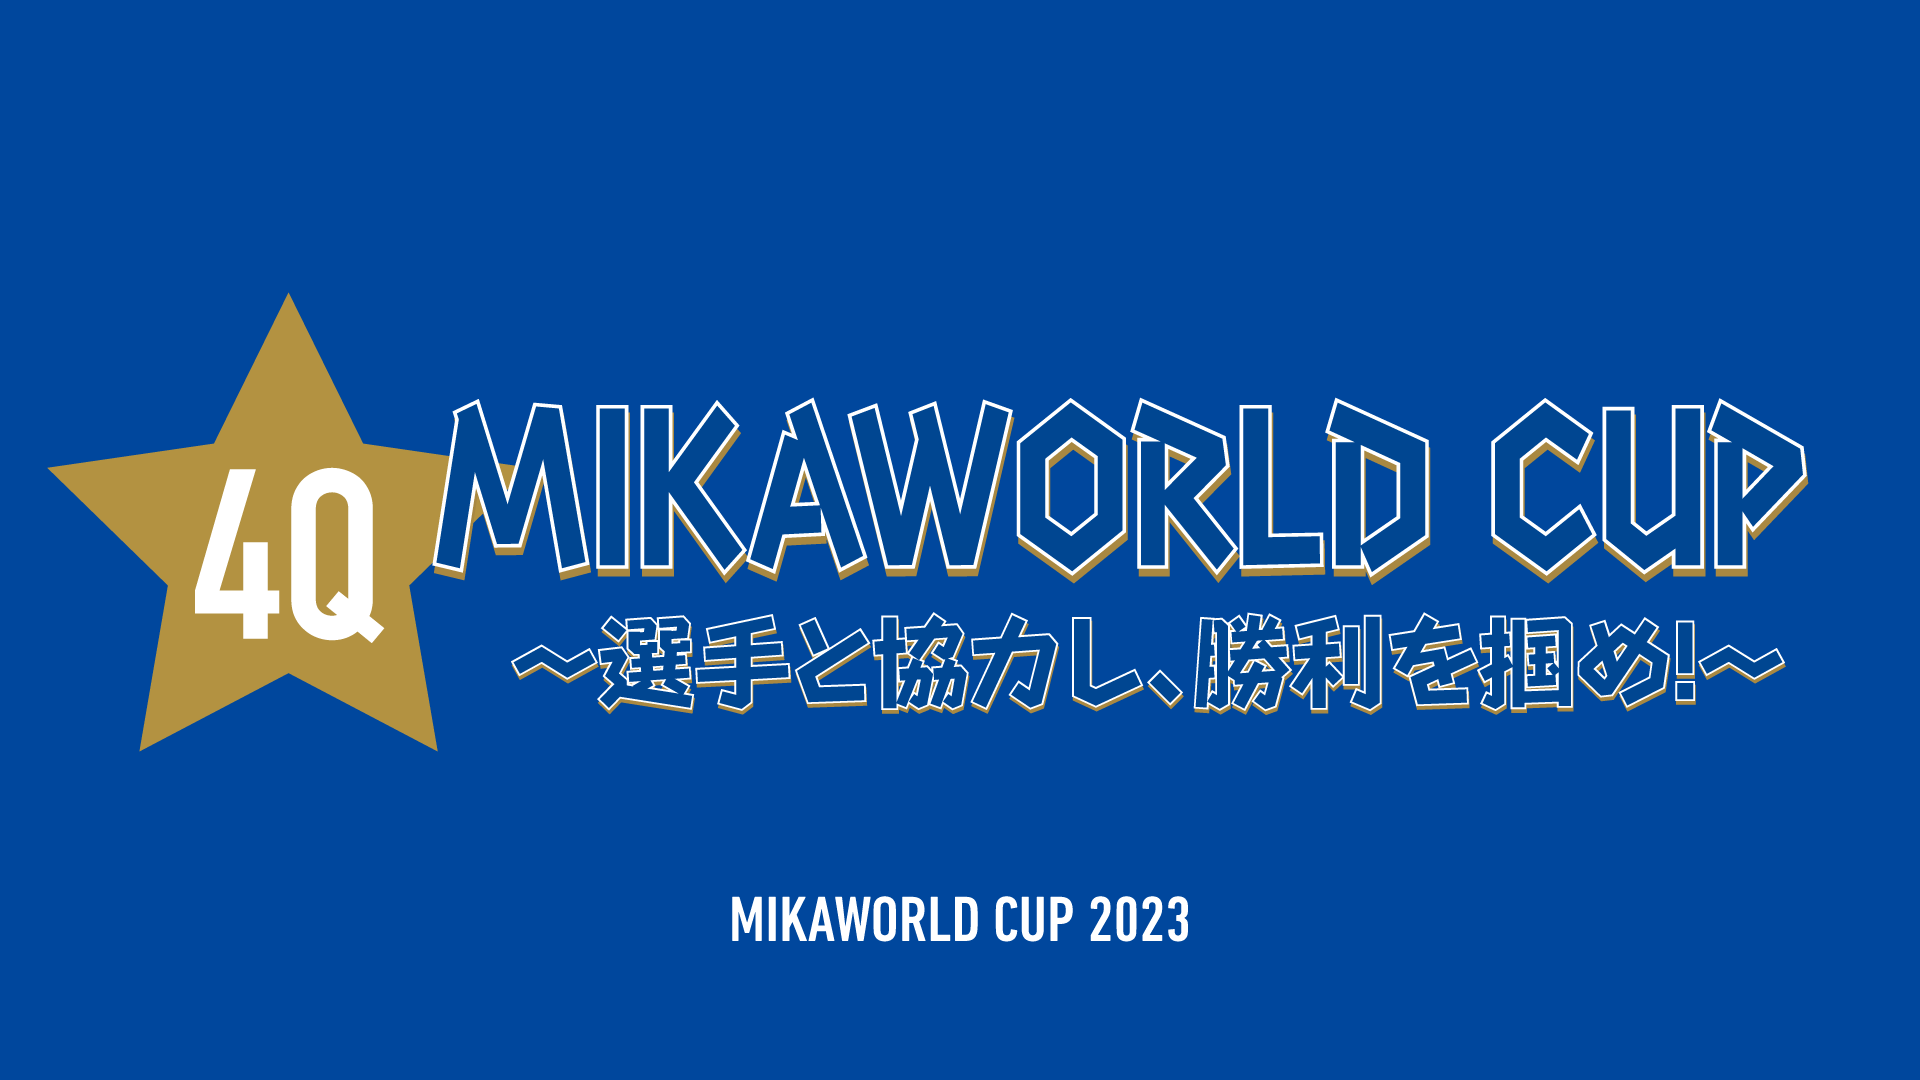 MIKAWORLD CUP